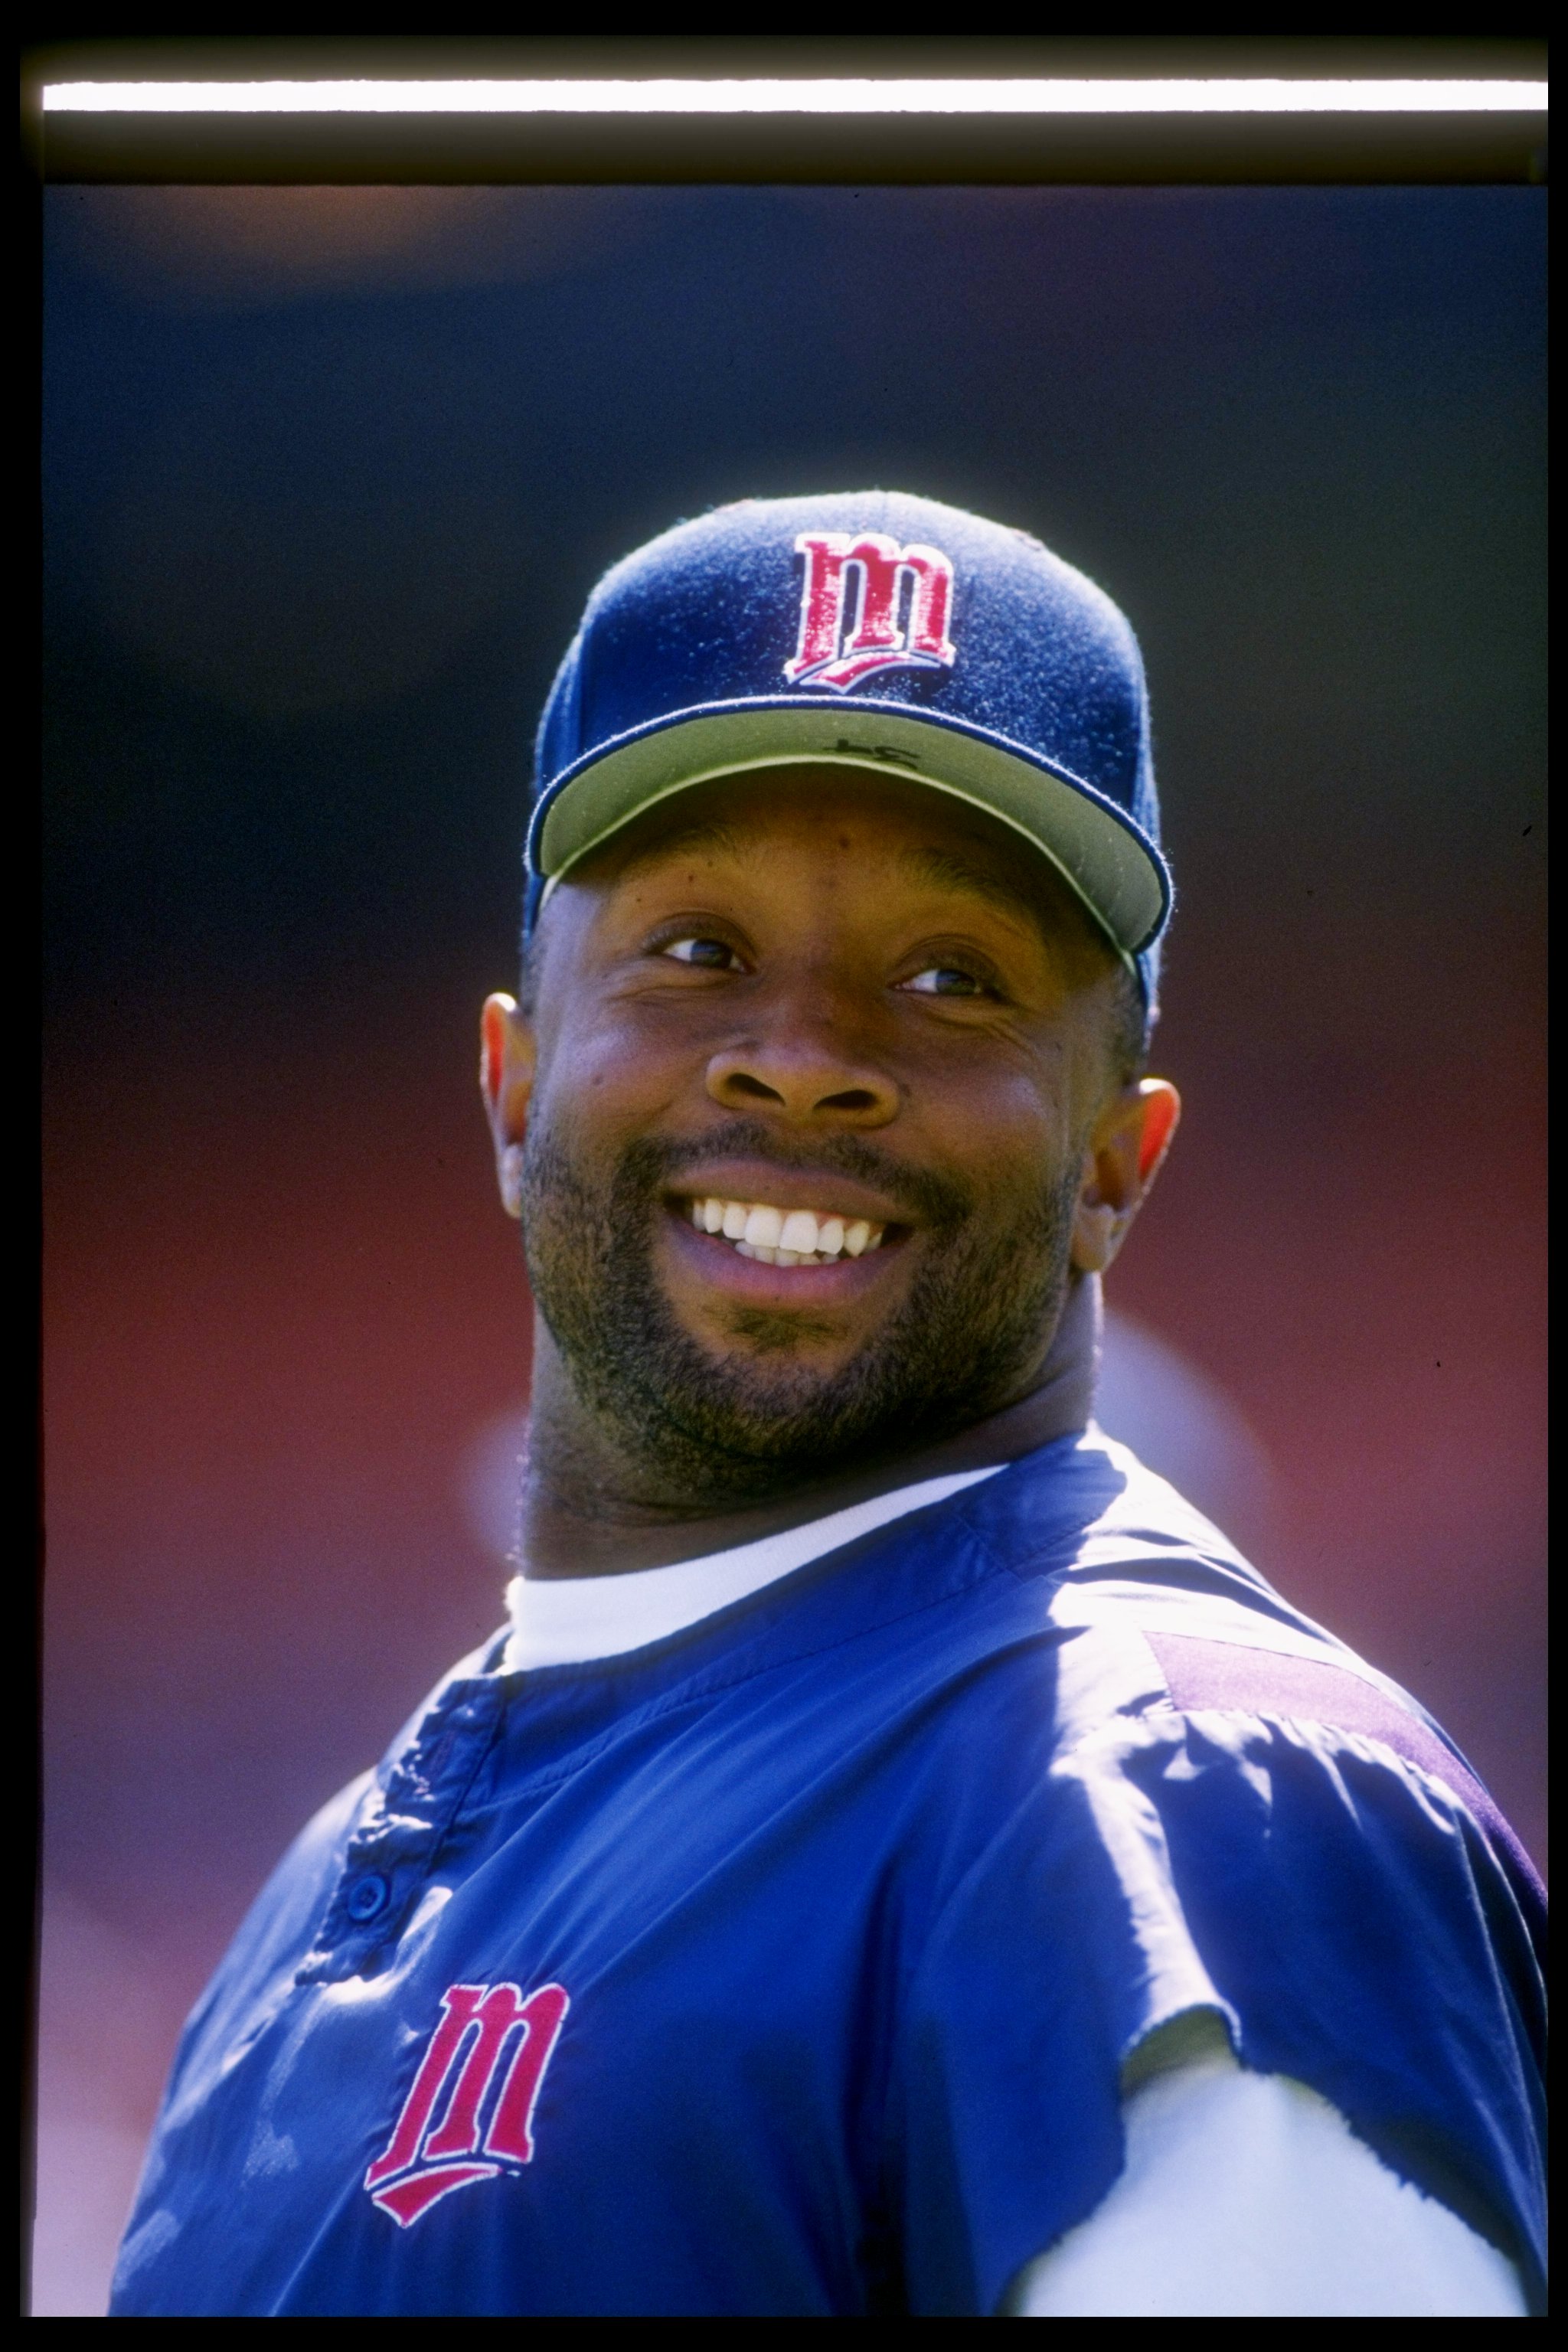 Debate No. 2: Who was the better player: Kirby Puckett or Joe